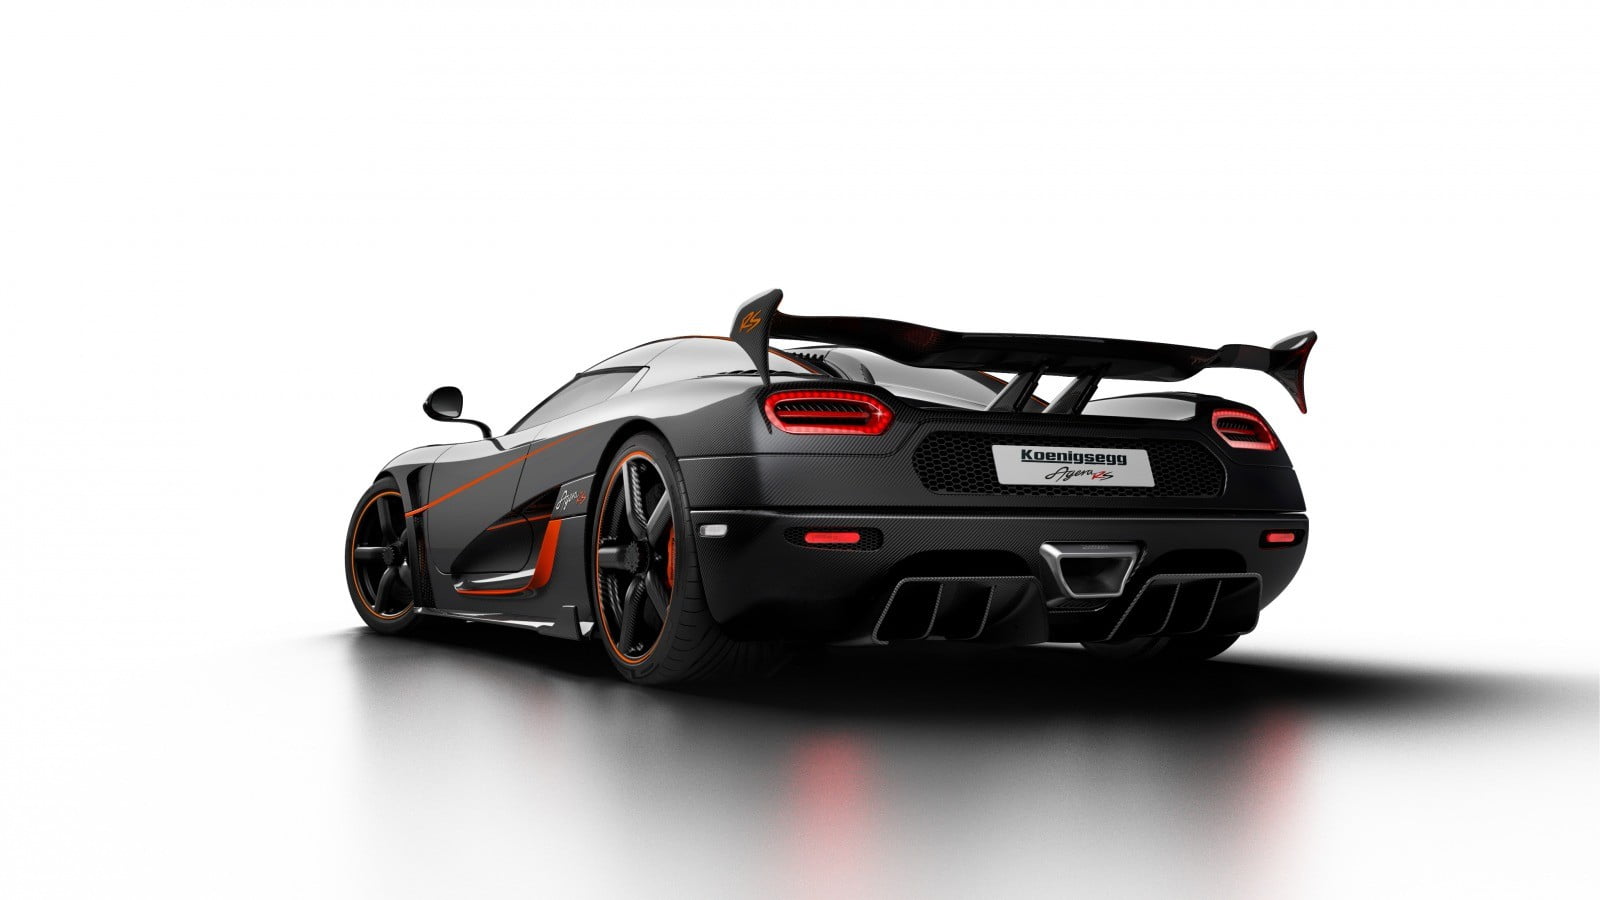 black and red sports vehicle, car, Koenigsegg Agera RS